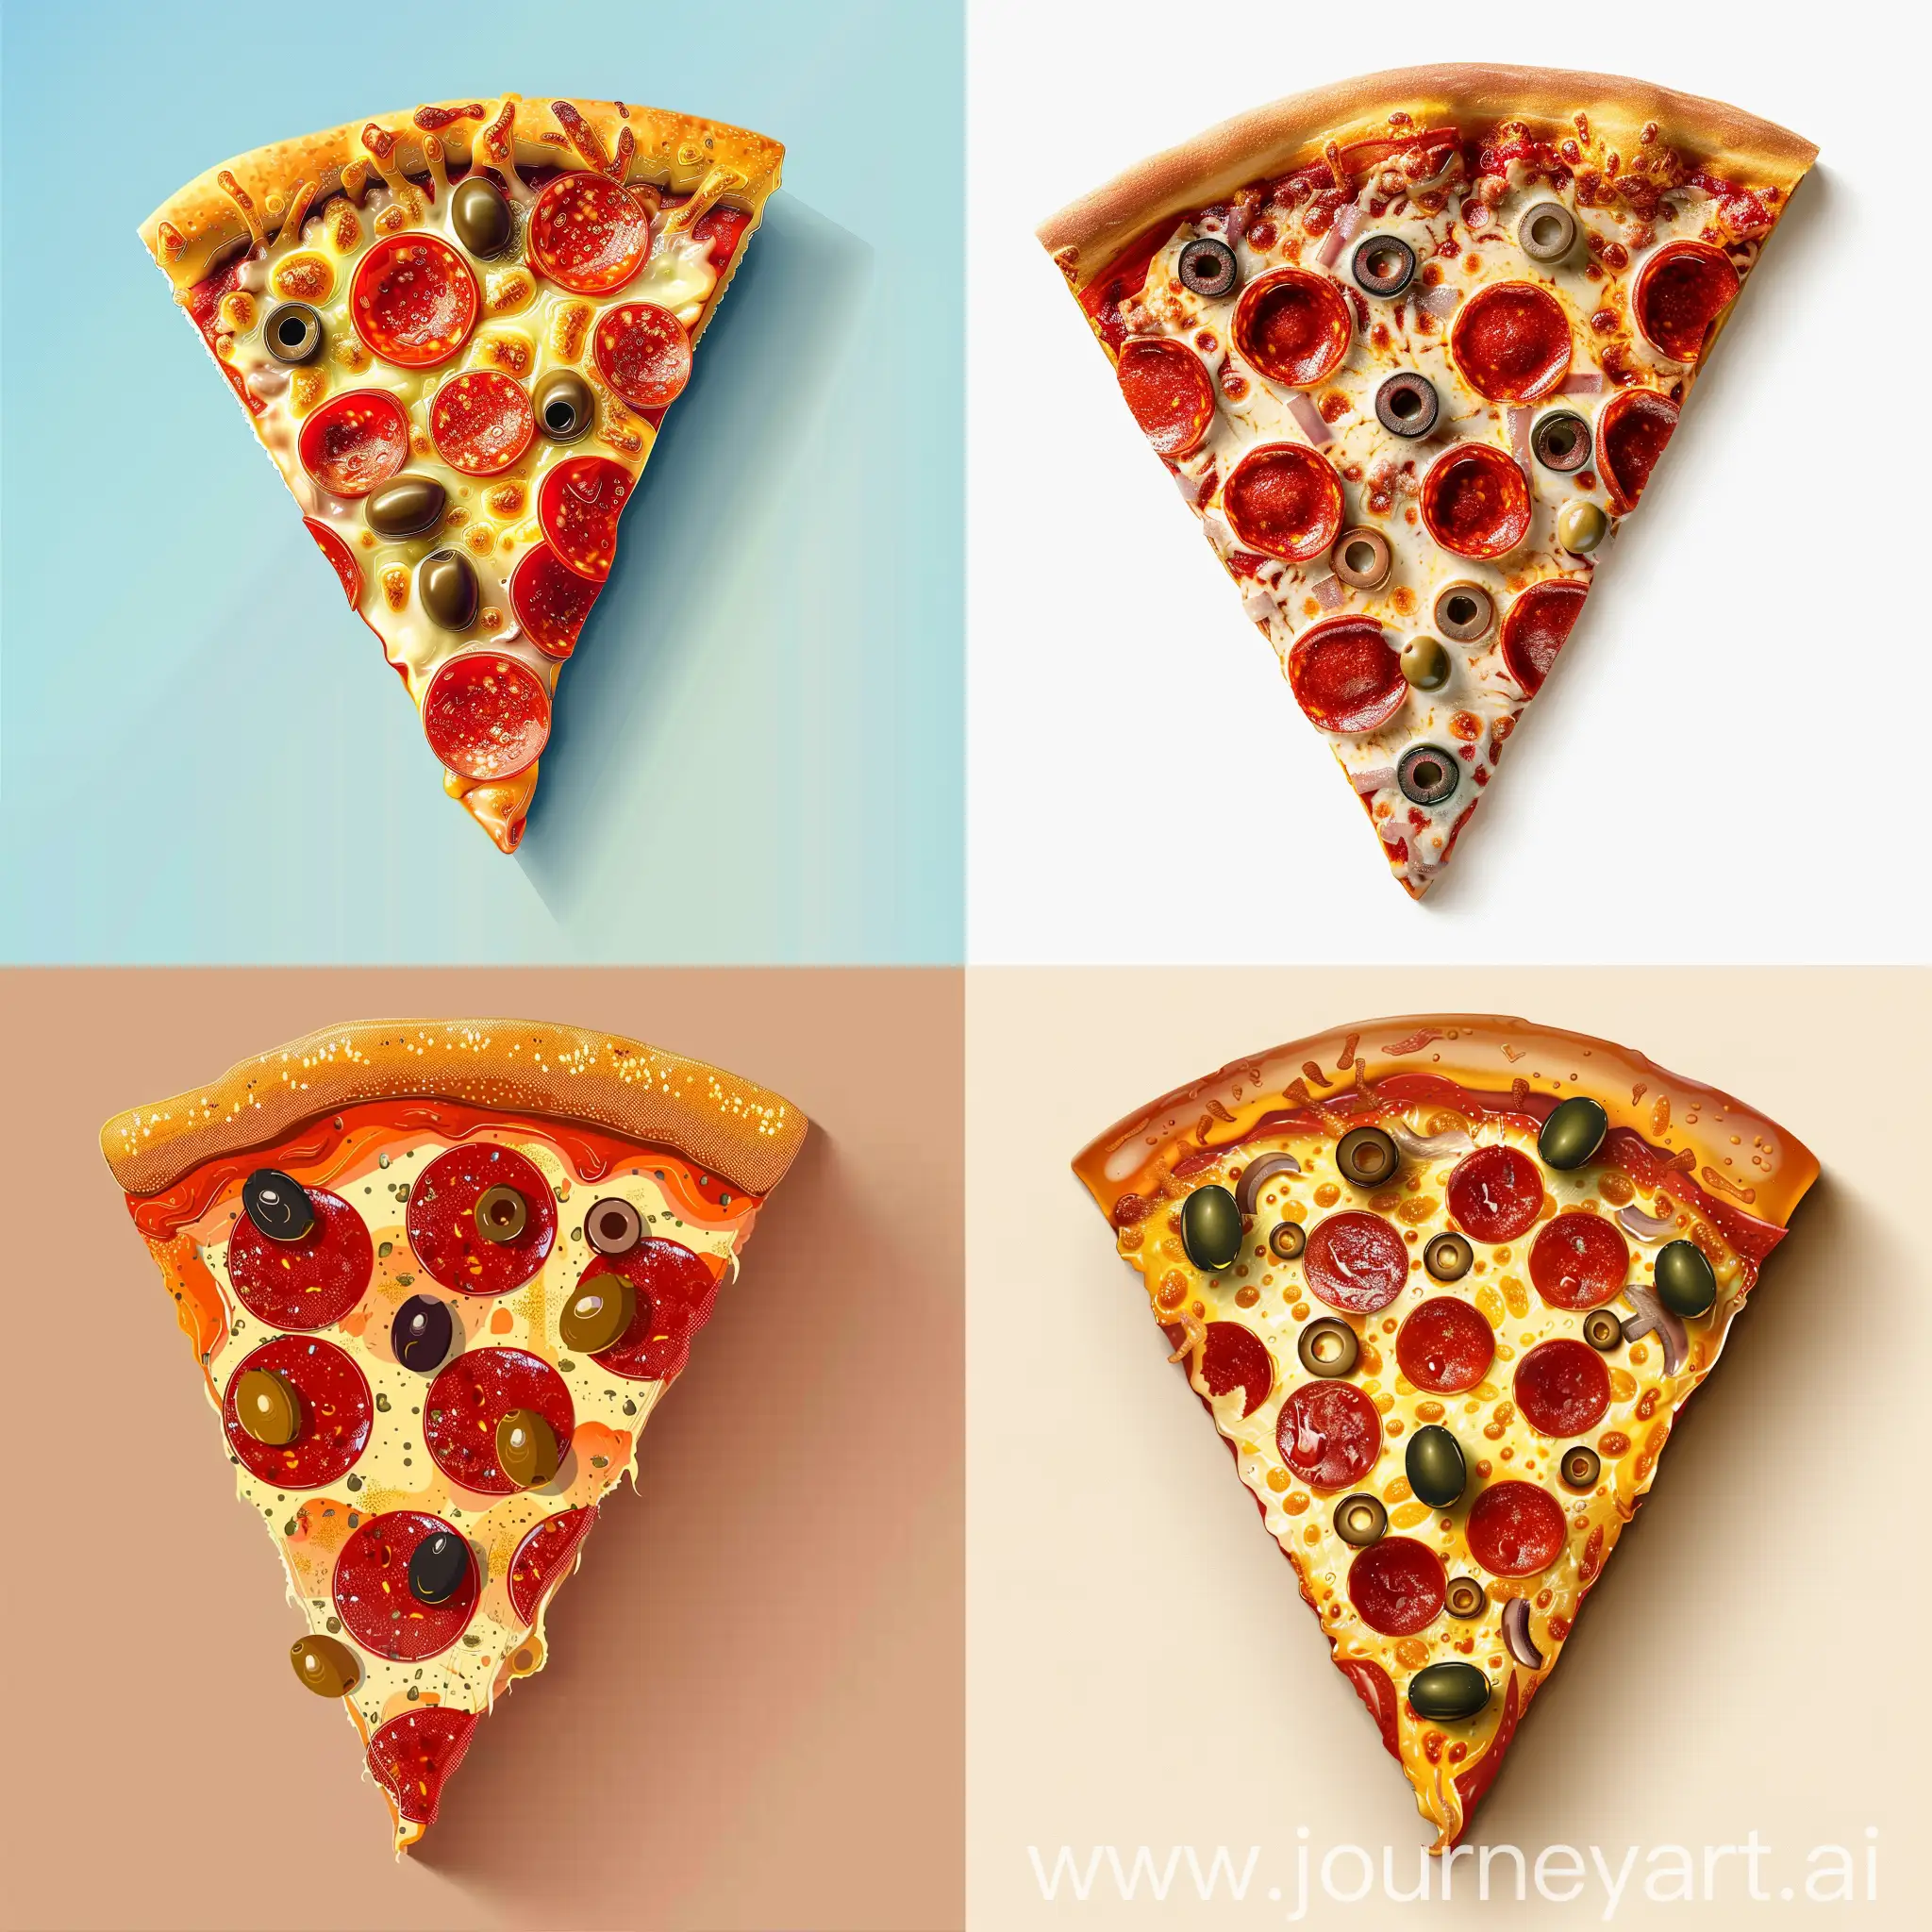 Delicious-Pepperoni-and-Olive-Pizza-Slice-in-HighQuality-Flat-Style